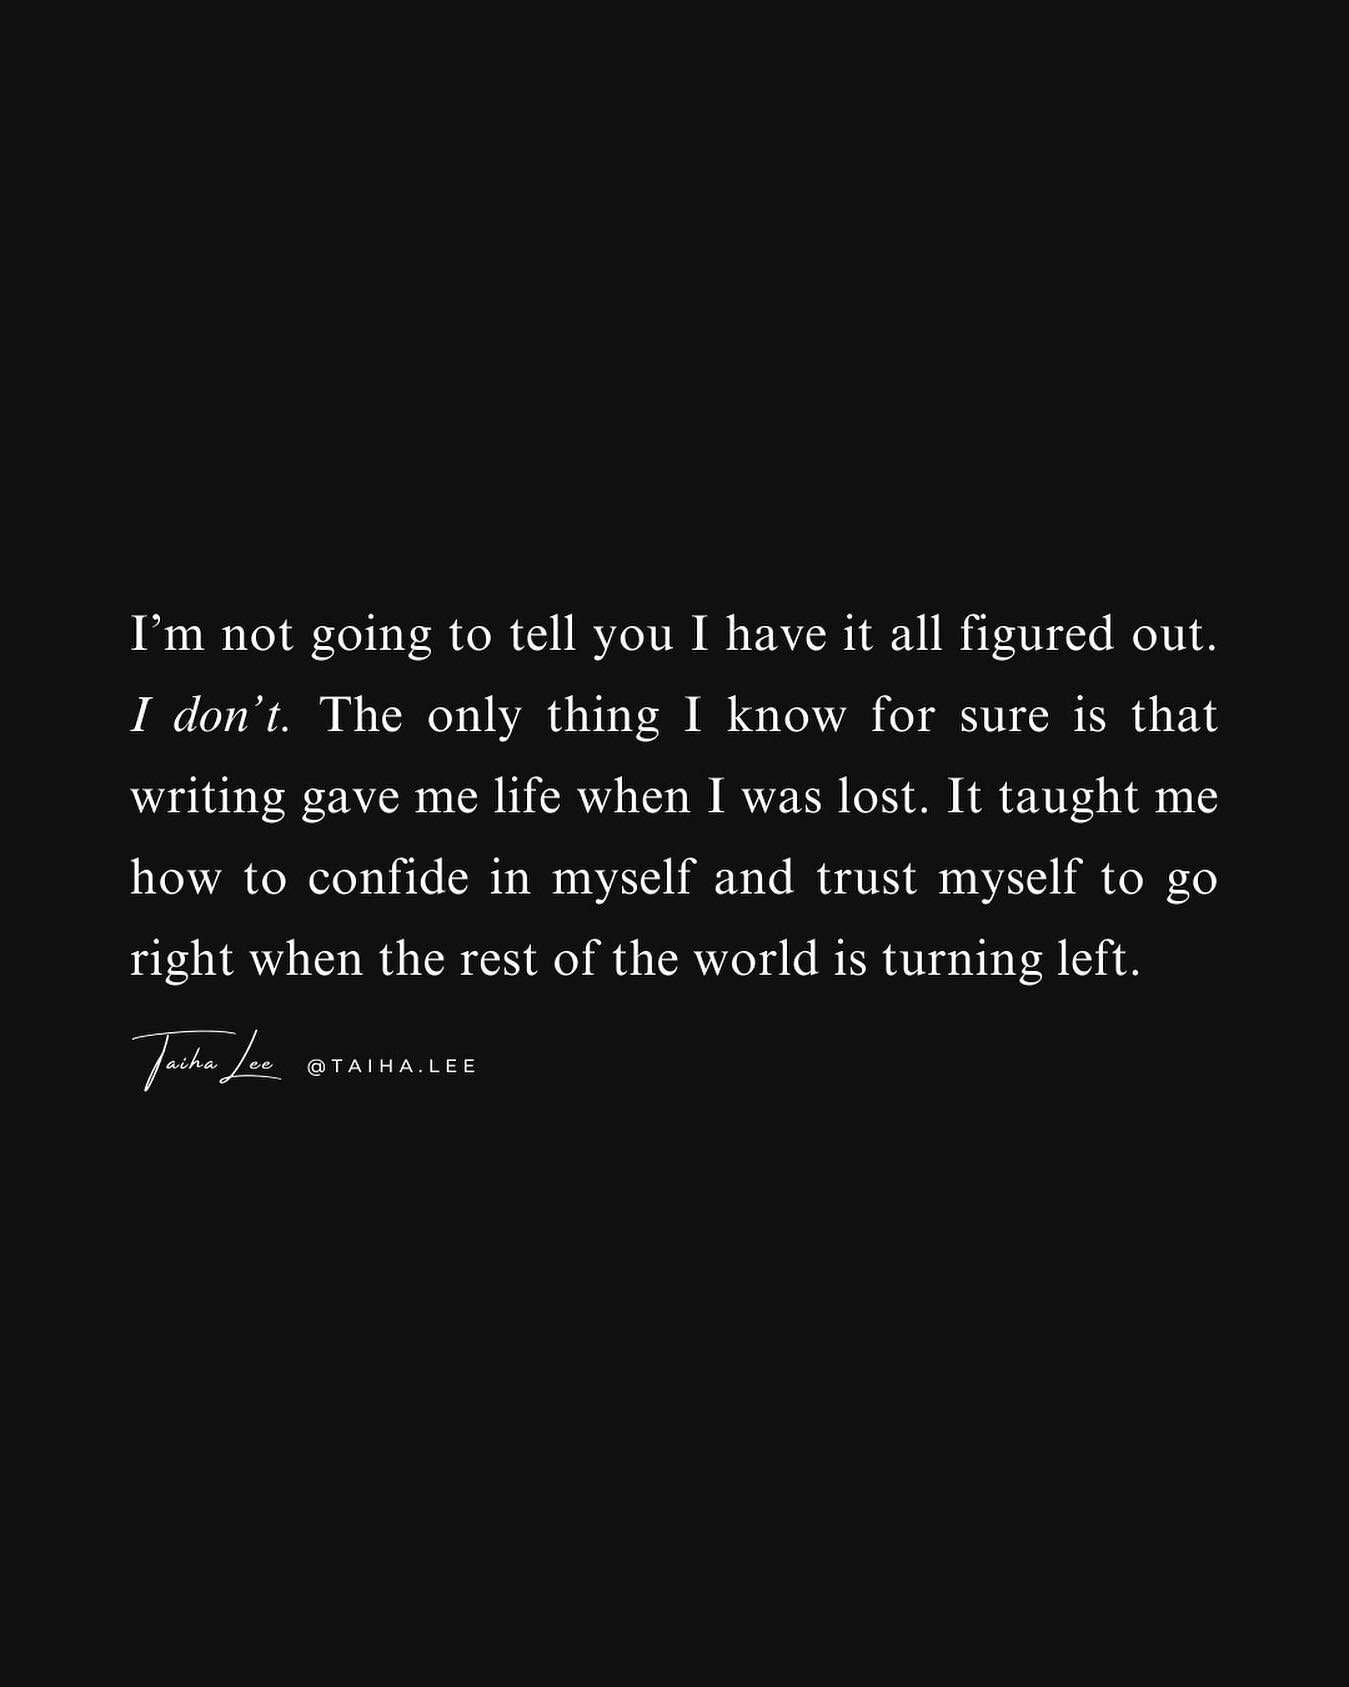 I&rsquo;m not going to tell you I have it all figured out. I don&rsquo;t. The only thing I know for sure is that writing gave me life when I was lost. It taught me how to confide in myself and trust myself to go right when the rest of the world is tu